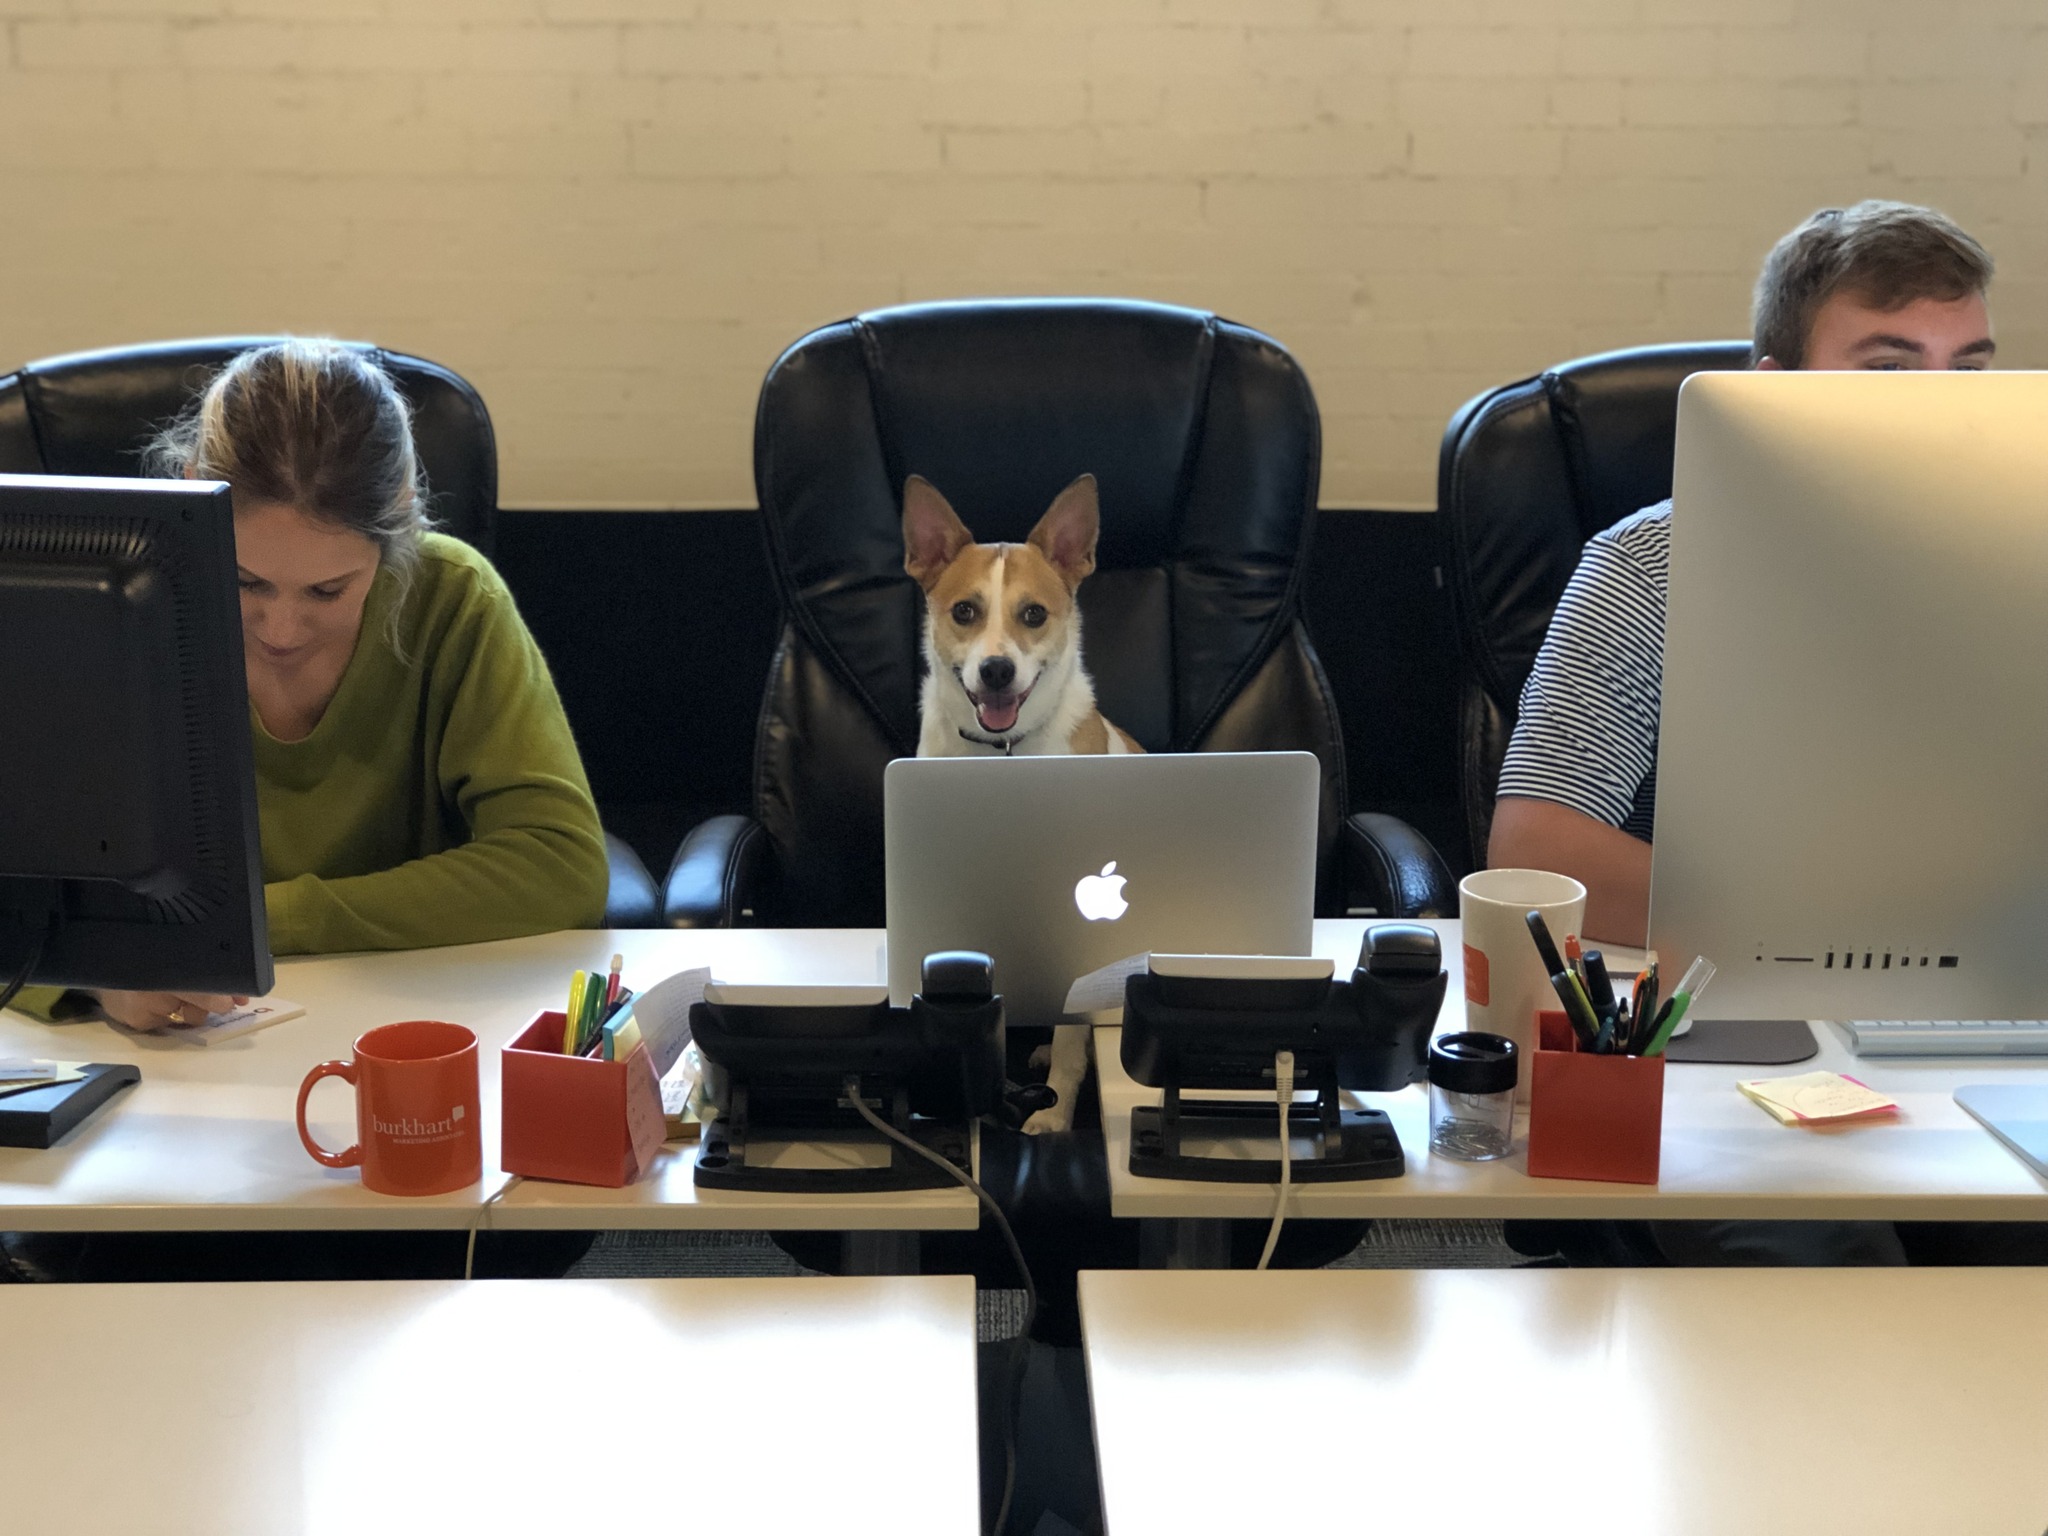 A dog at a desk between two focused employees in a casual office setting.